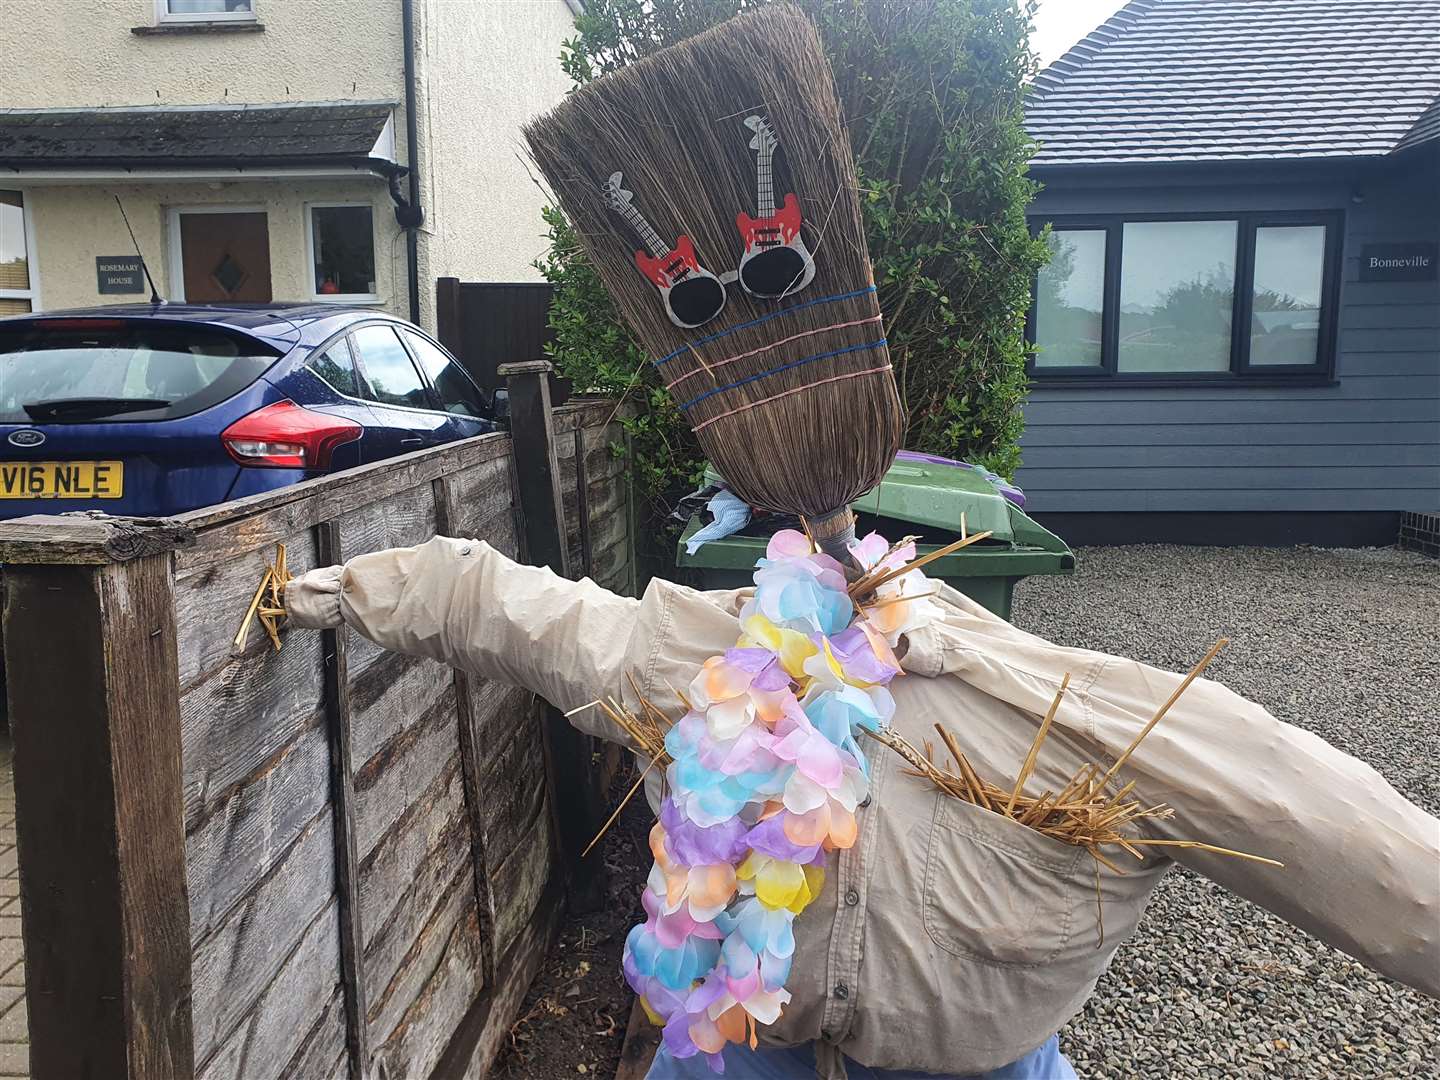 This scarecrow with a broom for a head is raising smiles